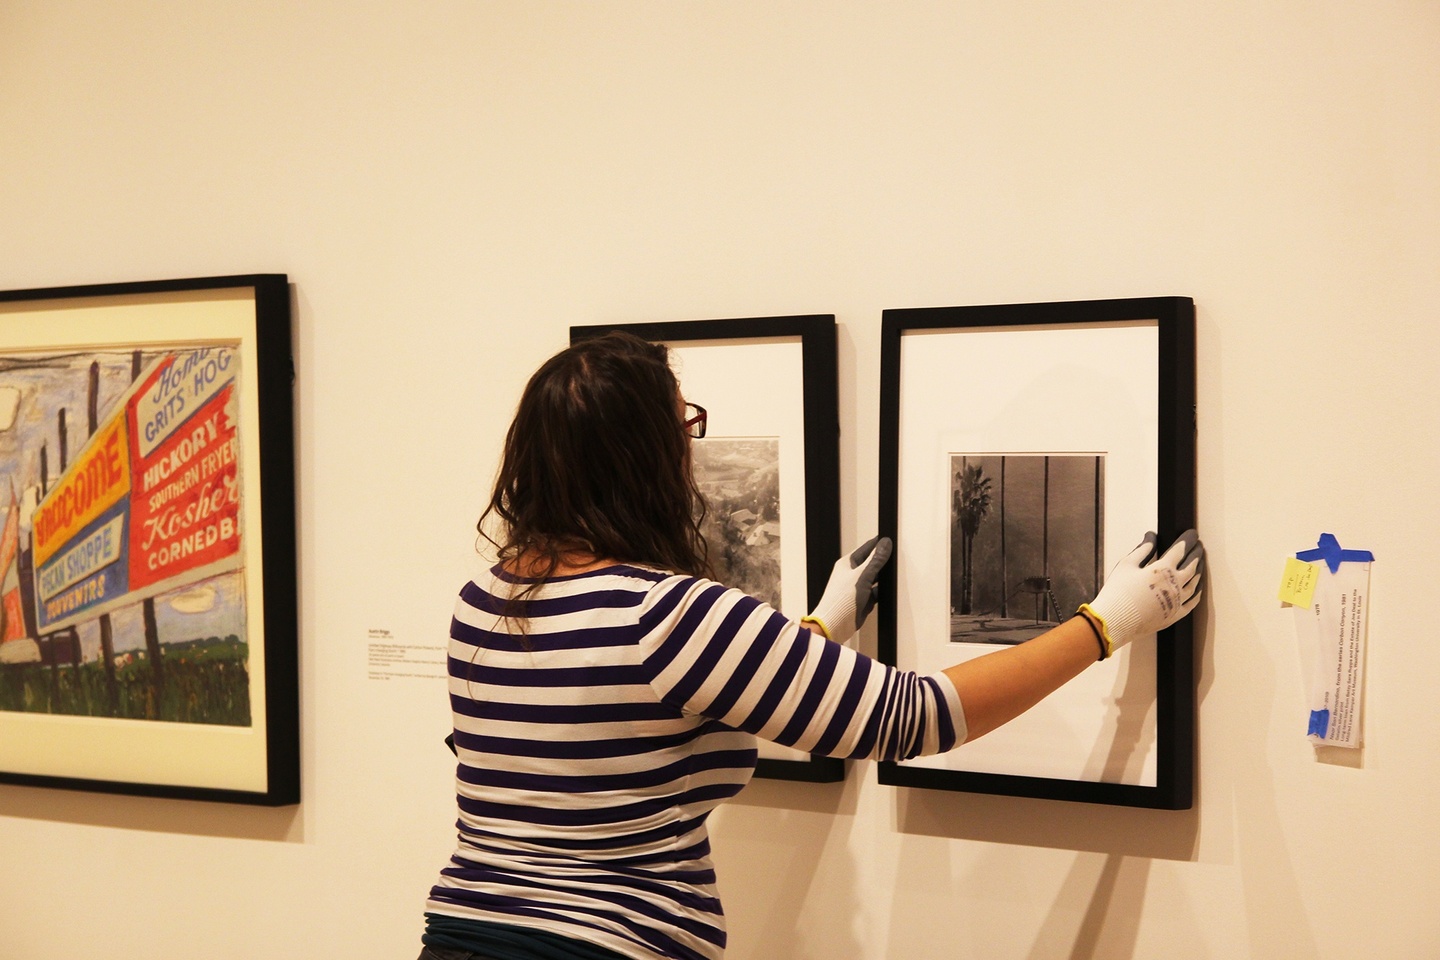 A person hanging a framed black-and-white photo on a wall with two other framed artworks